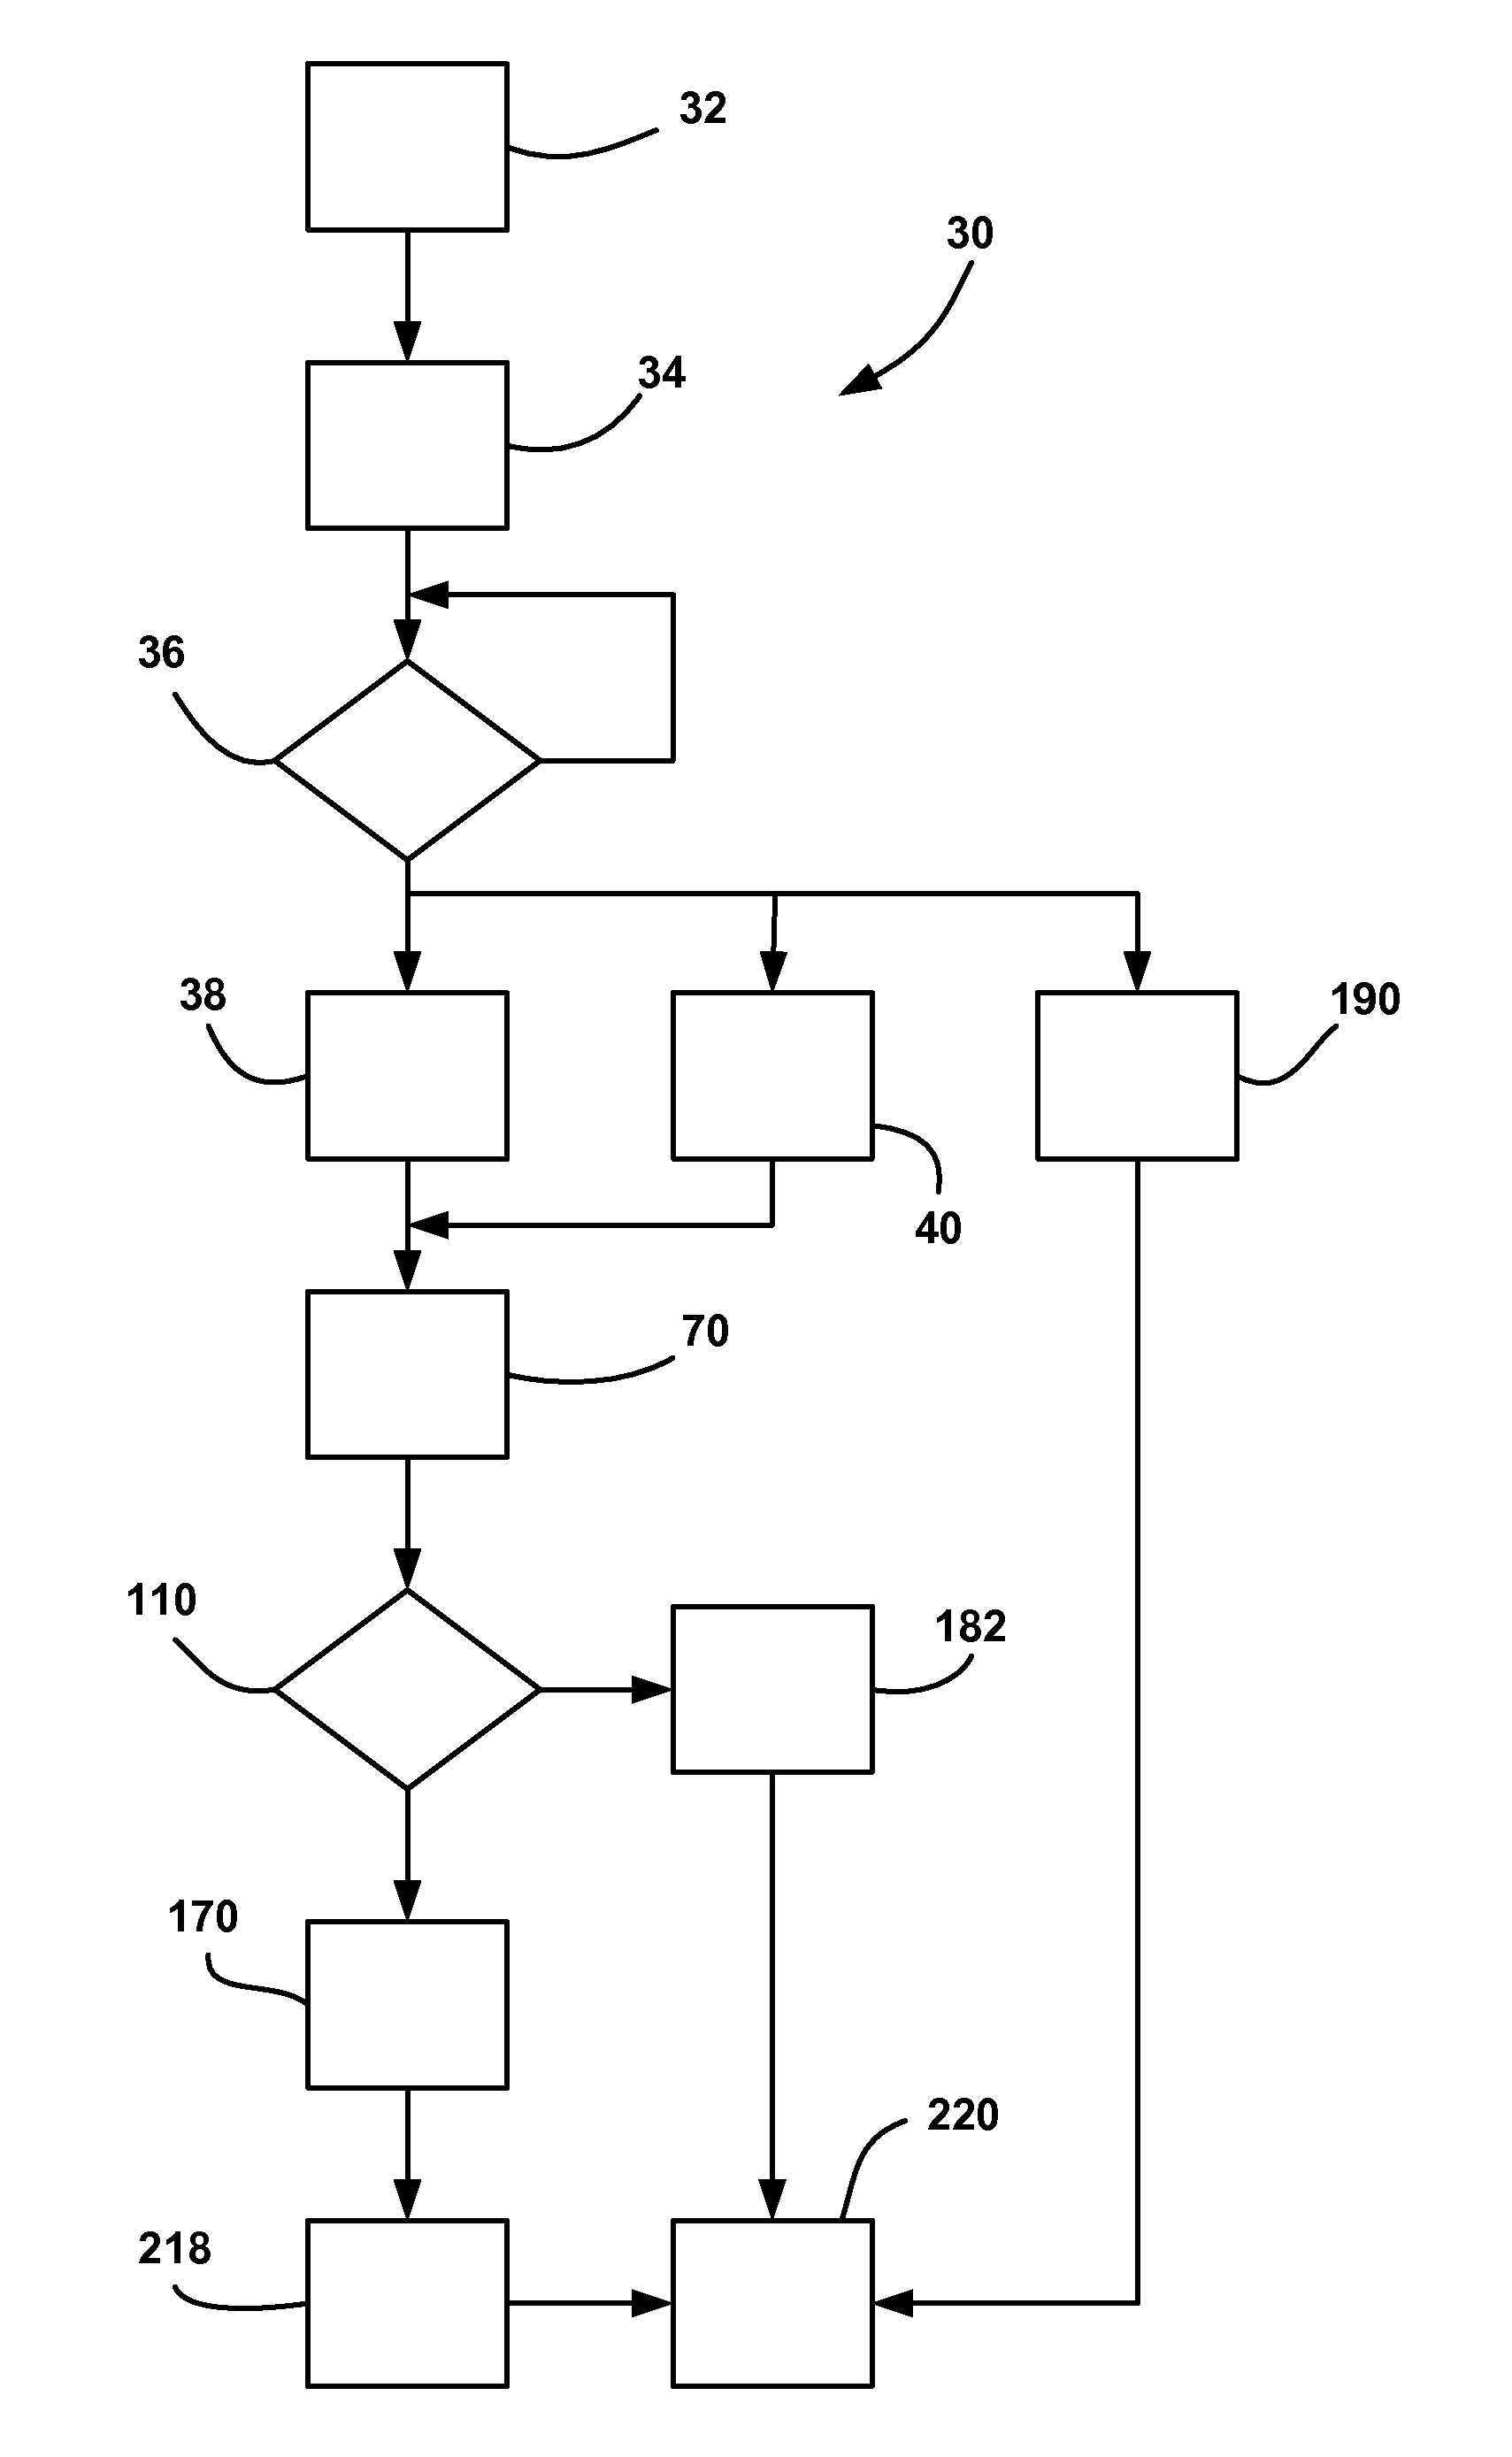 Algorithm for determining the capacity of a battery while in service